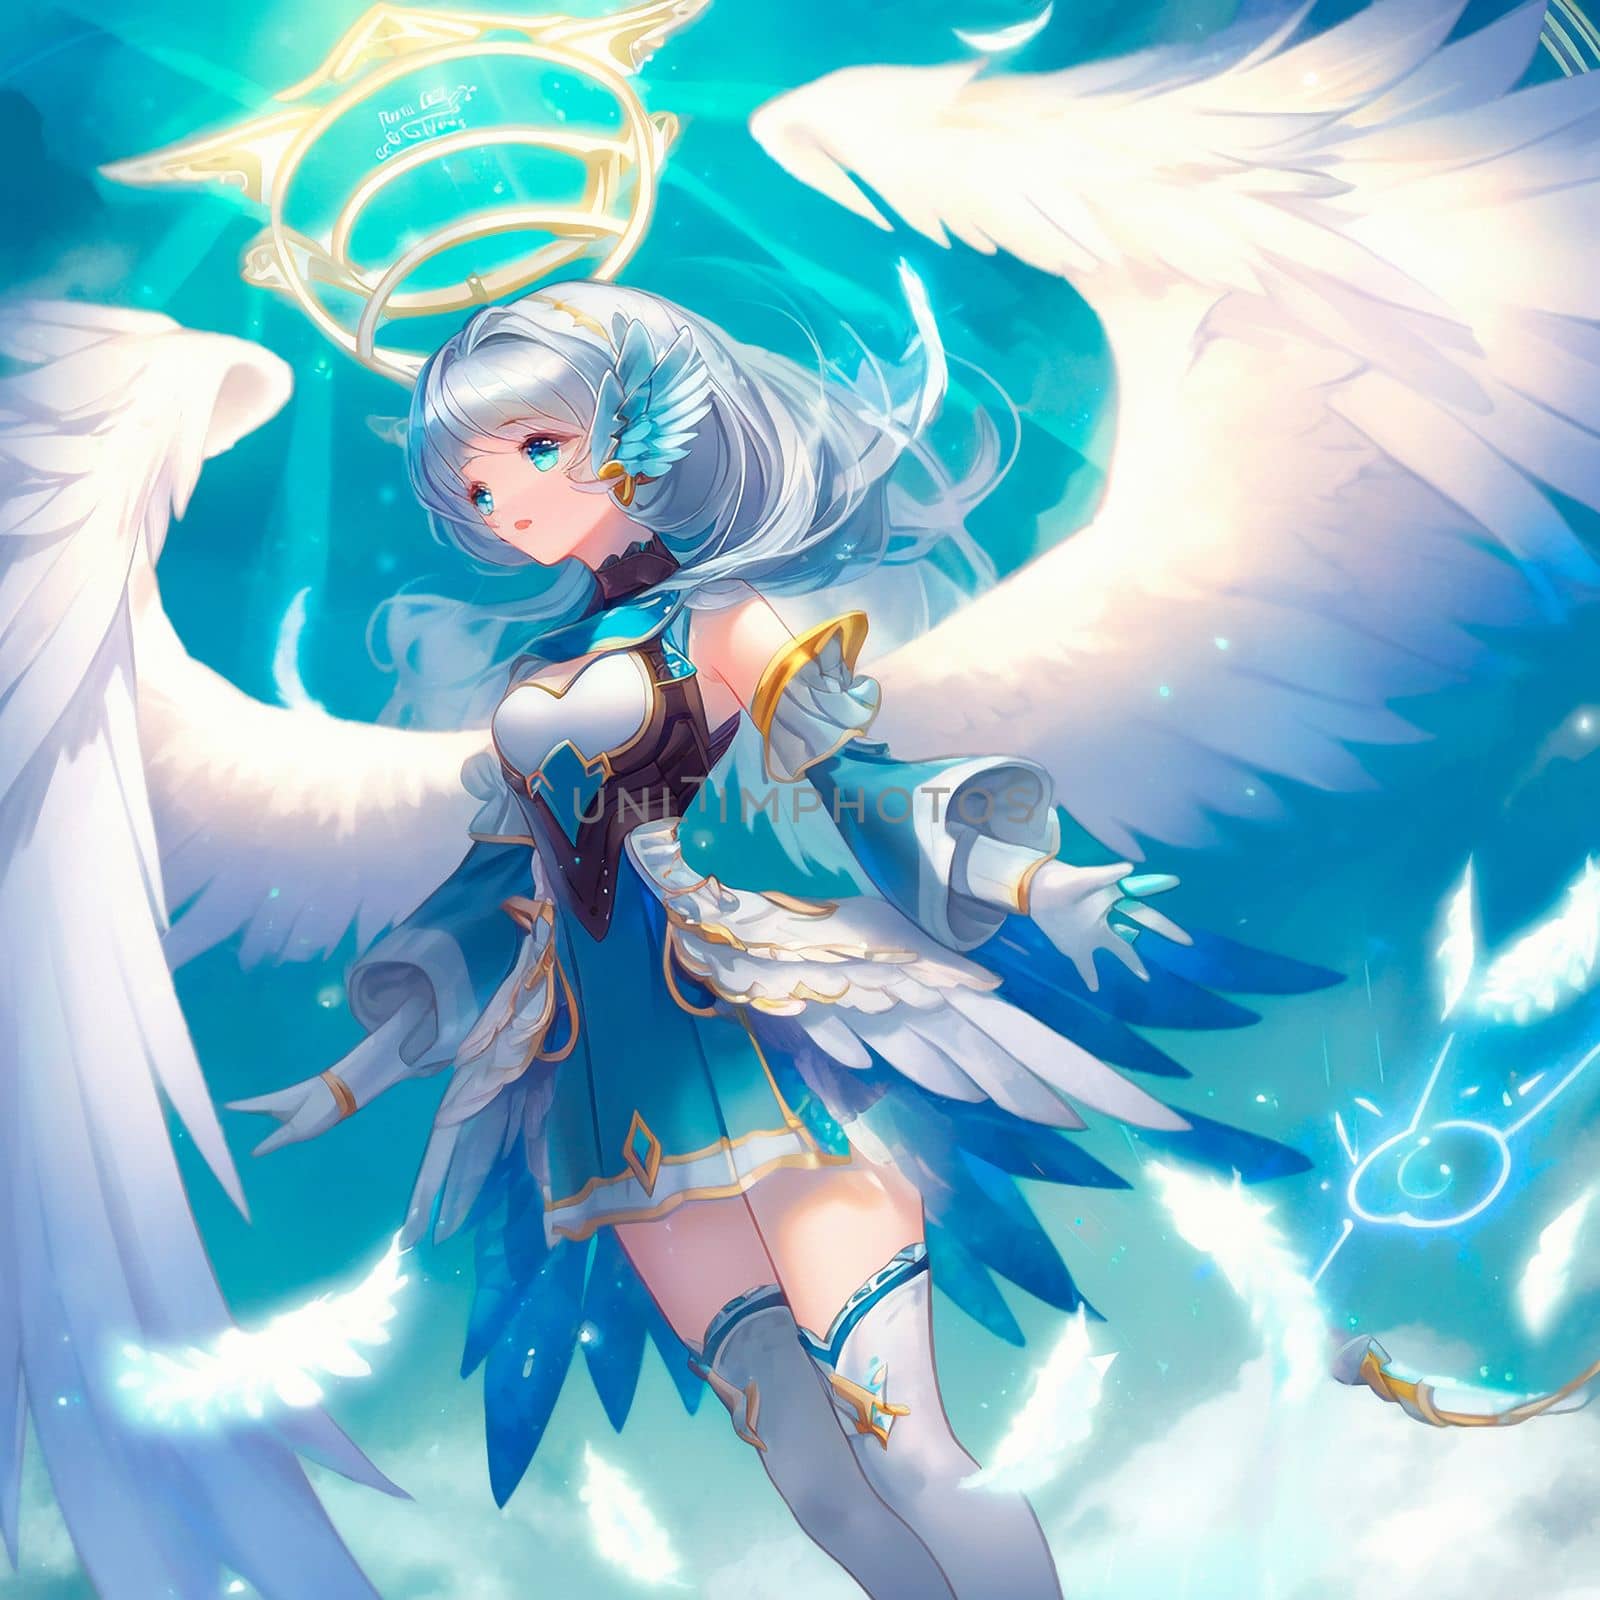 Beautiful angel girl in anime style. High quality illustration